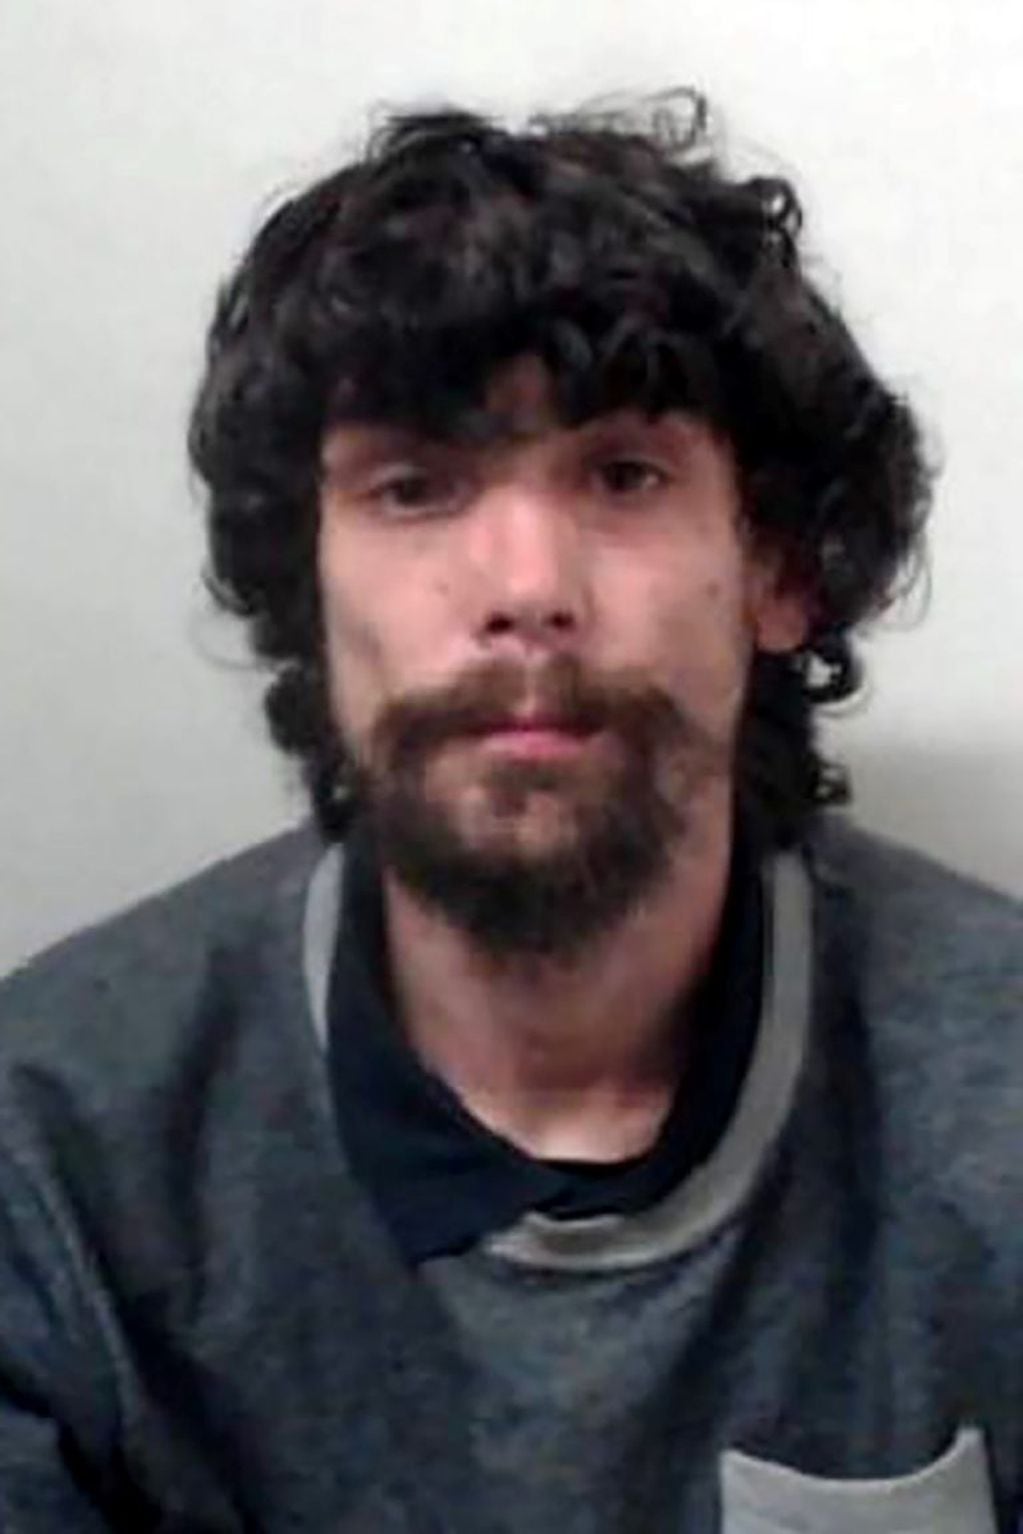 A handout picture released by the Greater Manchester Police (GMP) on January 30, 2018, shows the custody photograph of Christopher Parker who was was sentenced to four years and three months after pleading guilty to theft, fraud and breaching his bail at Manchester Crown Square Court on January 30, 2018.
A homeless man hailed as a hero for apparently coming to the aid of victims of the Manchester Arena terror attack was jailed for more than  four years Tuesday after admitting to actually robbing them. / AFP PHOTO / GREATER MANCHESTER POLICE / HO